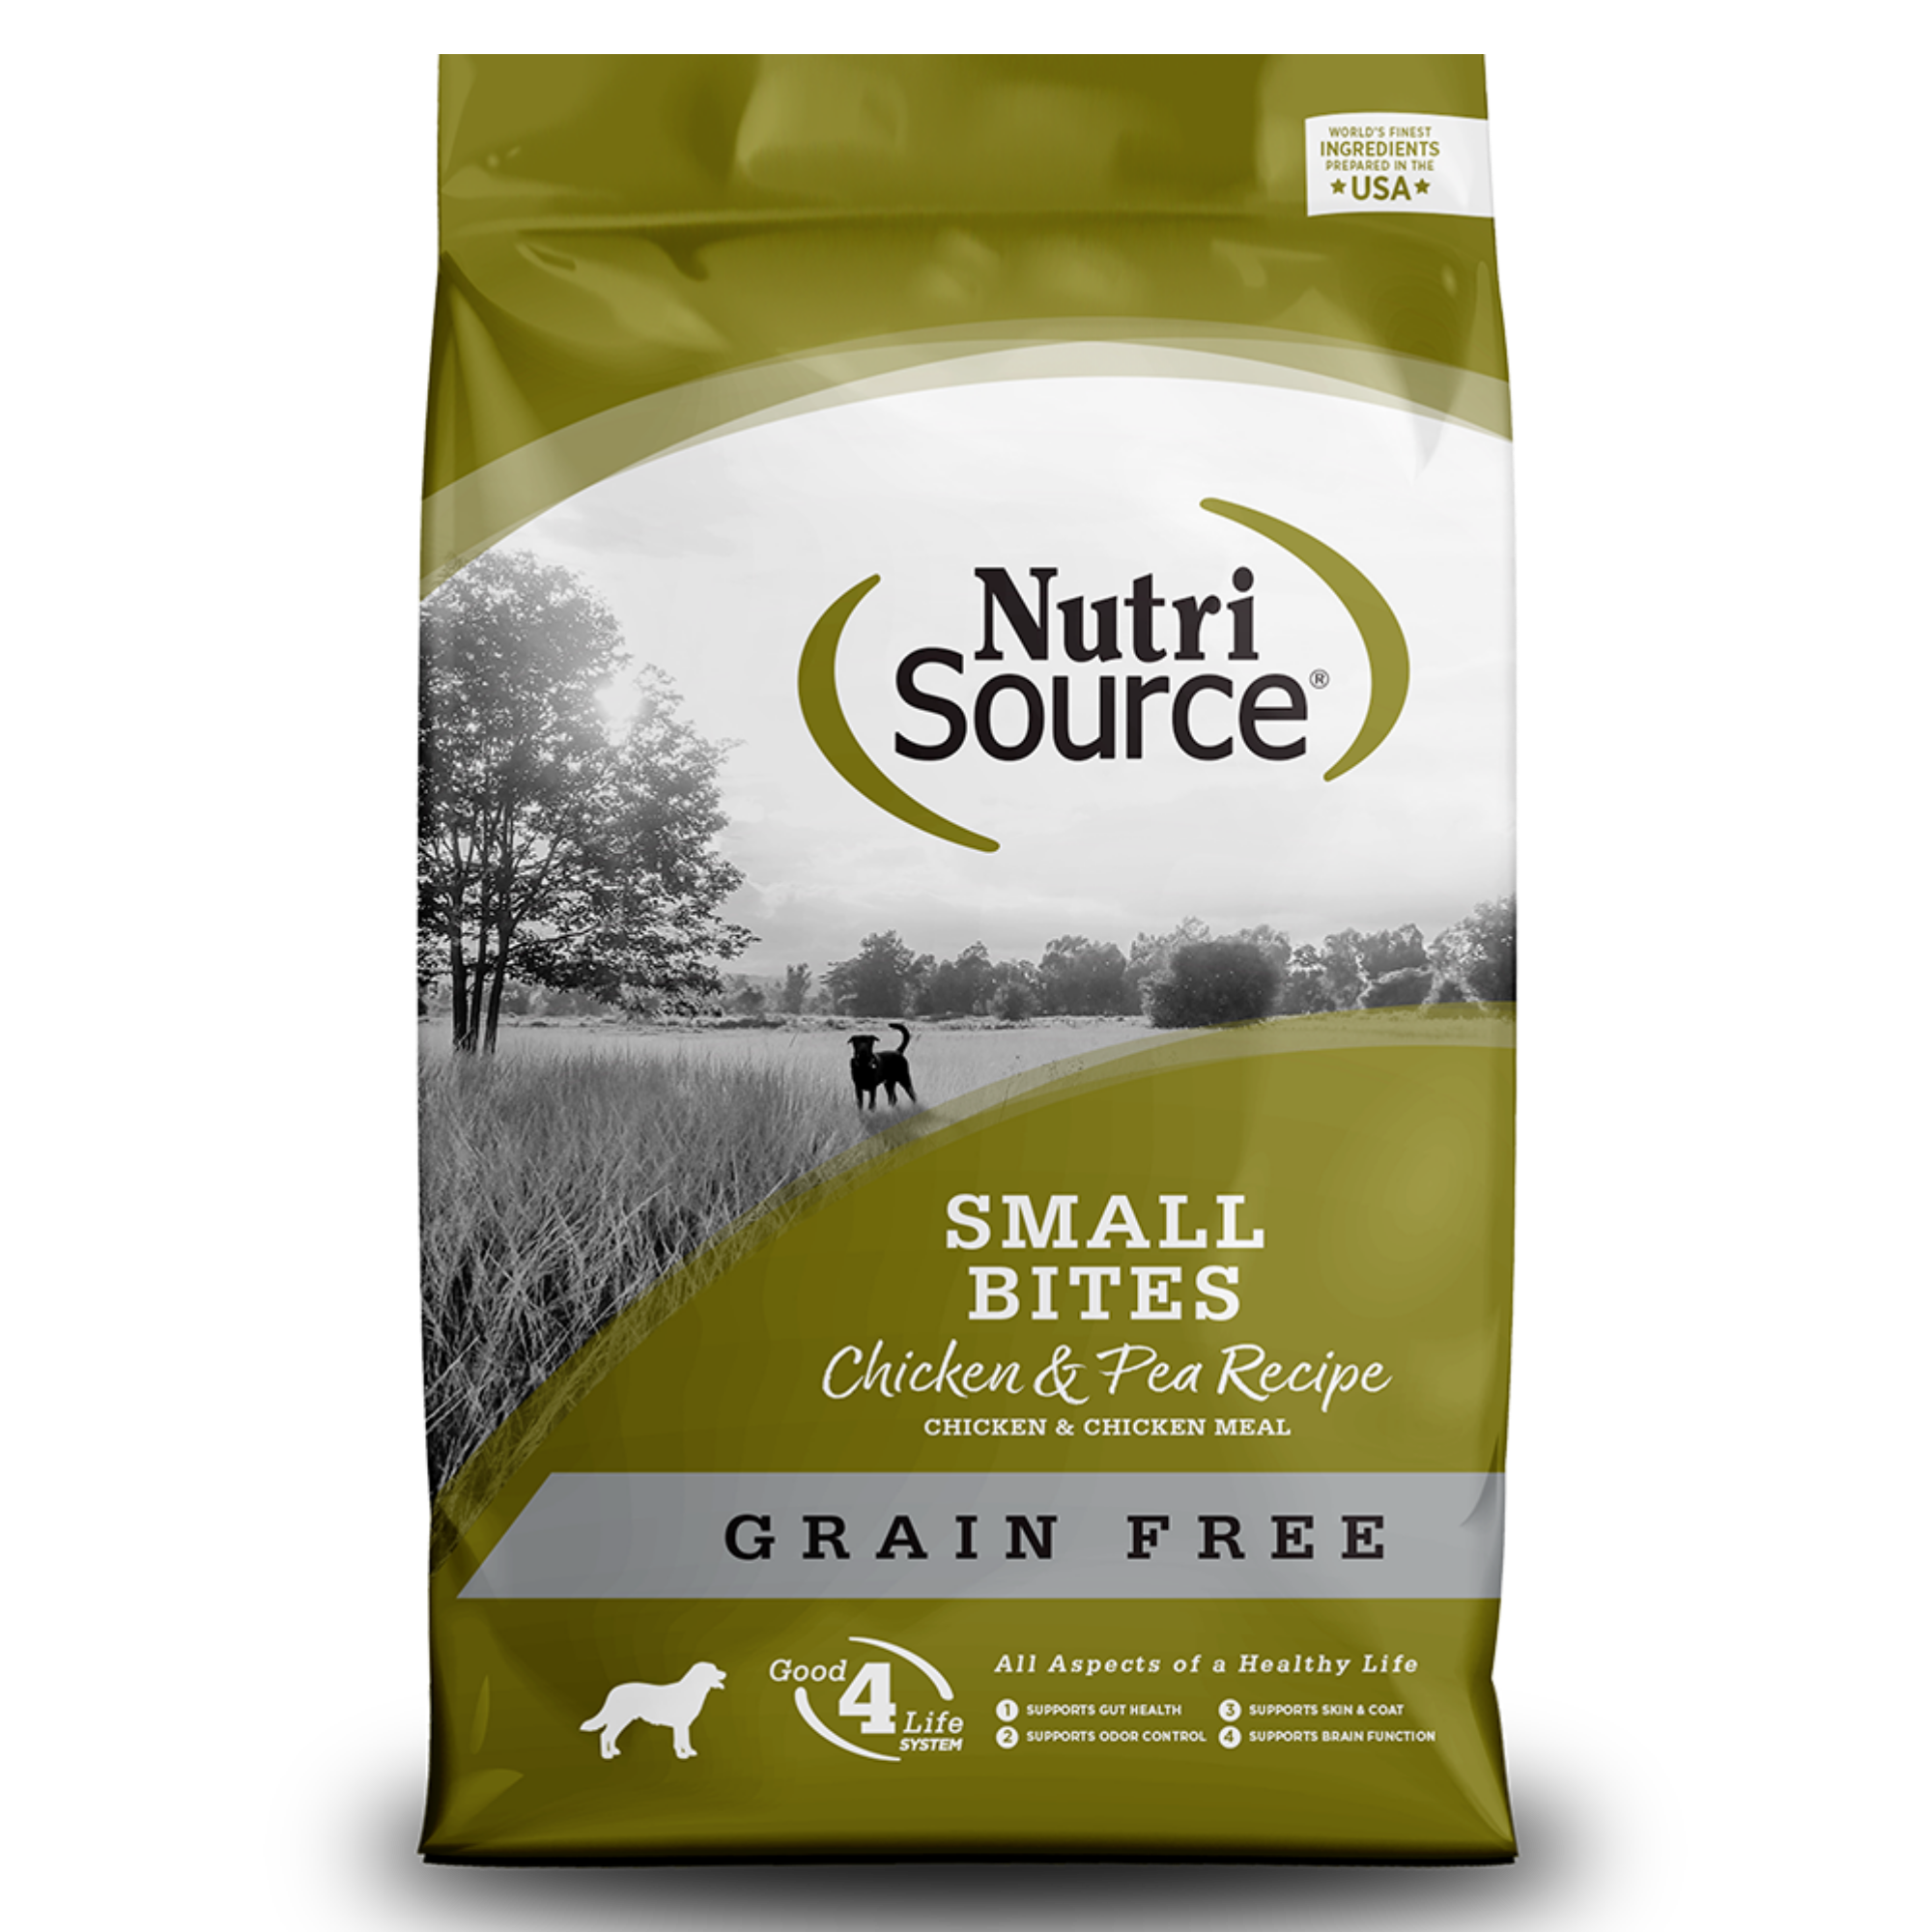 NutriSource Grain-Free Small Bites Chicken & Pea Formula Dry Dog Food - Mutts & Co.